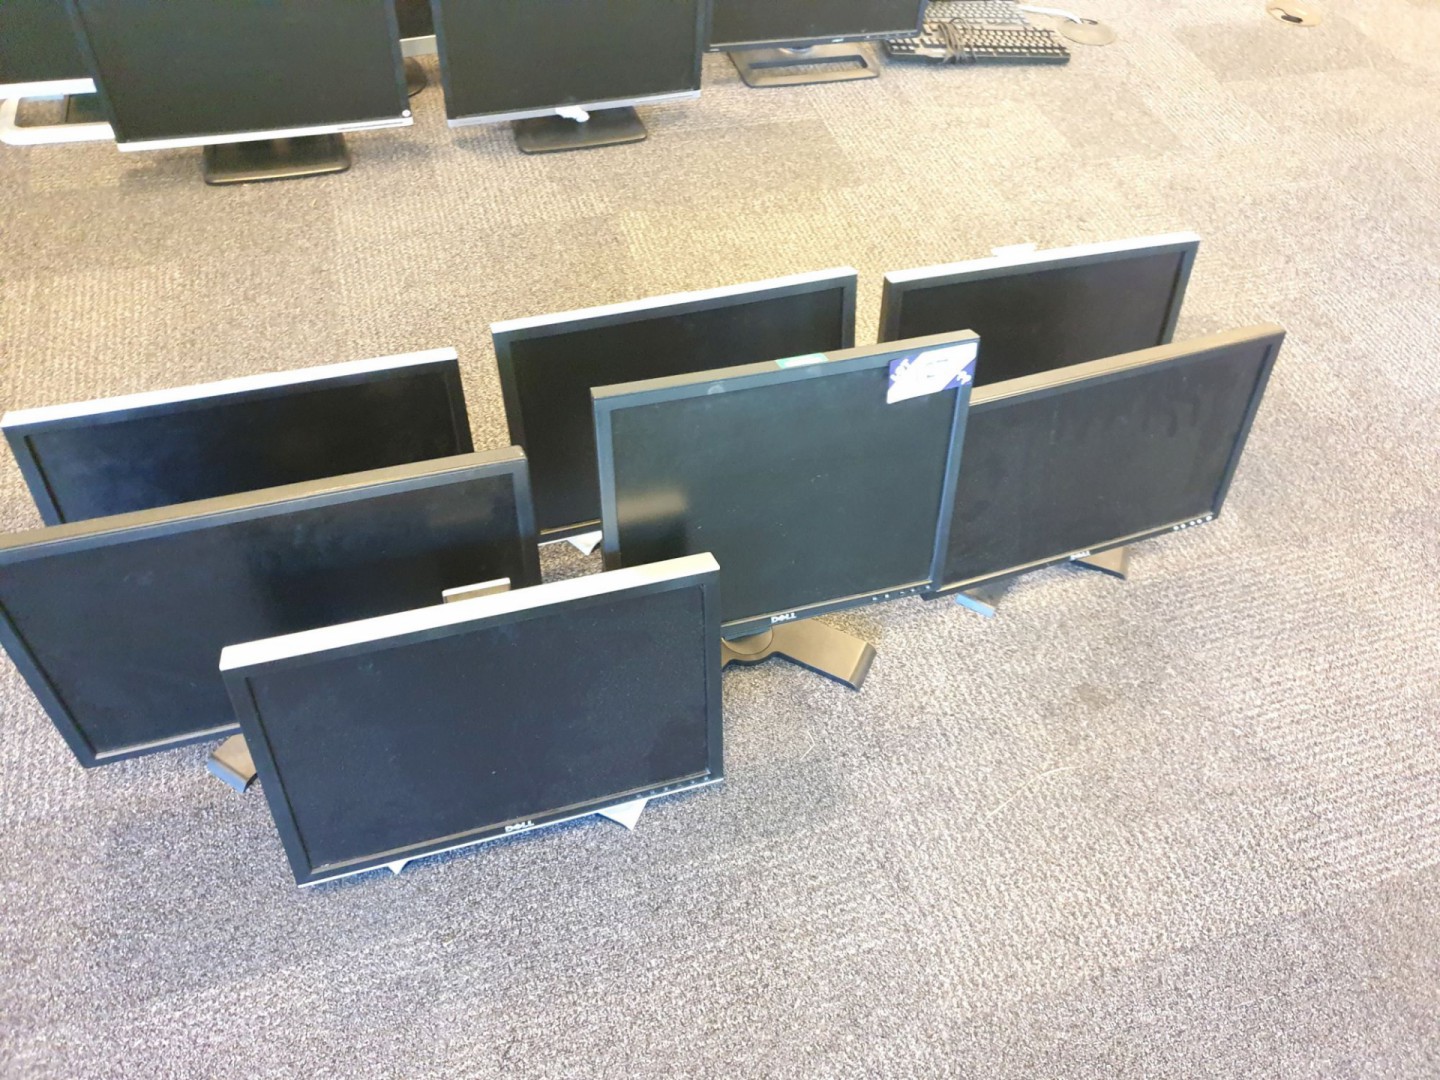 7x various Dell LCD monitors to 20"